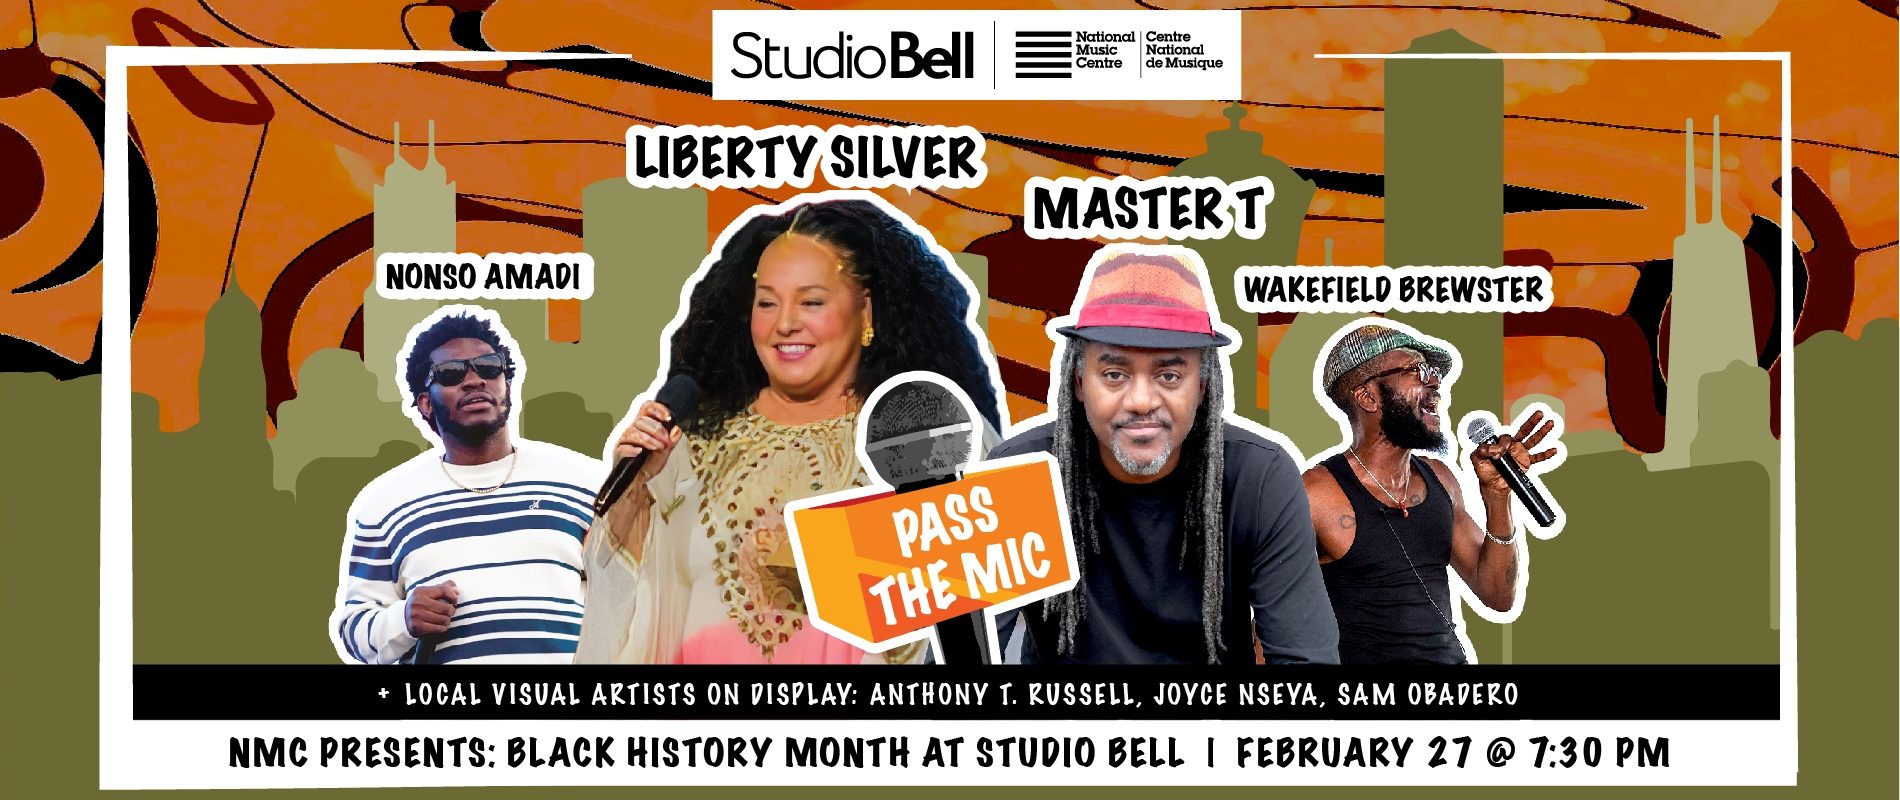 National Music Centre to “Pass the Mic” with Master T and Guests on February 27 for Black History Month